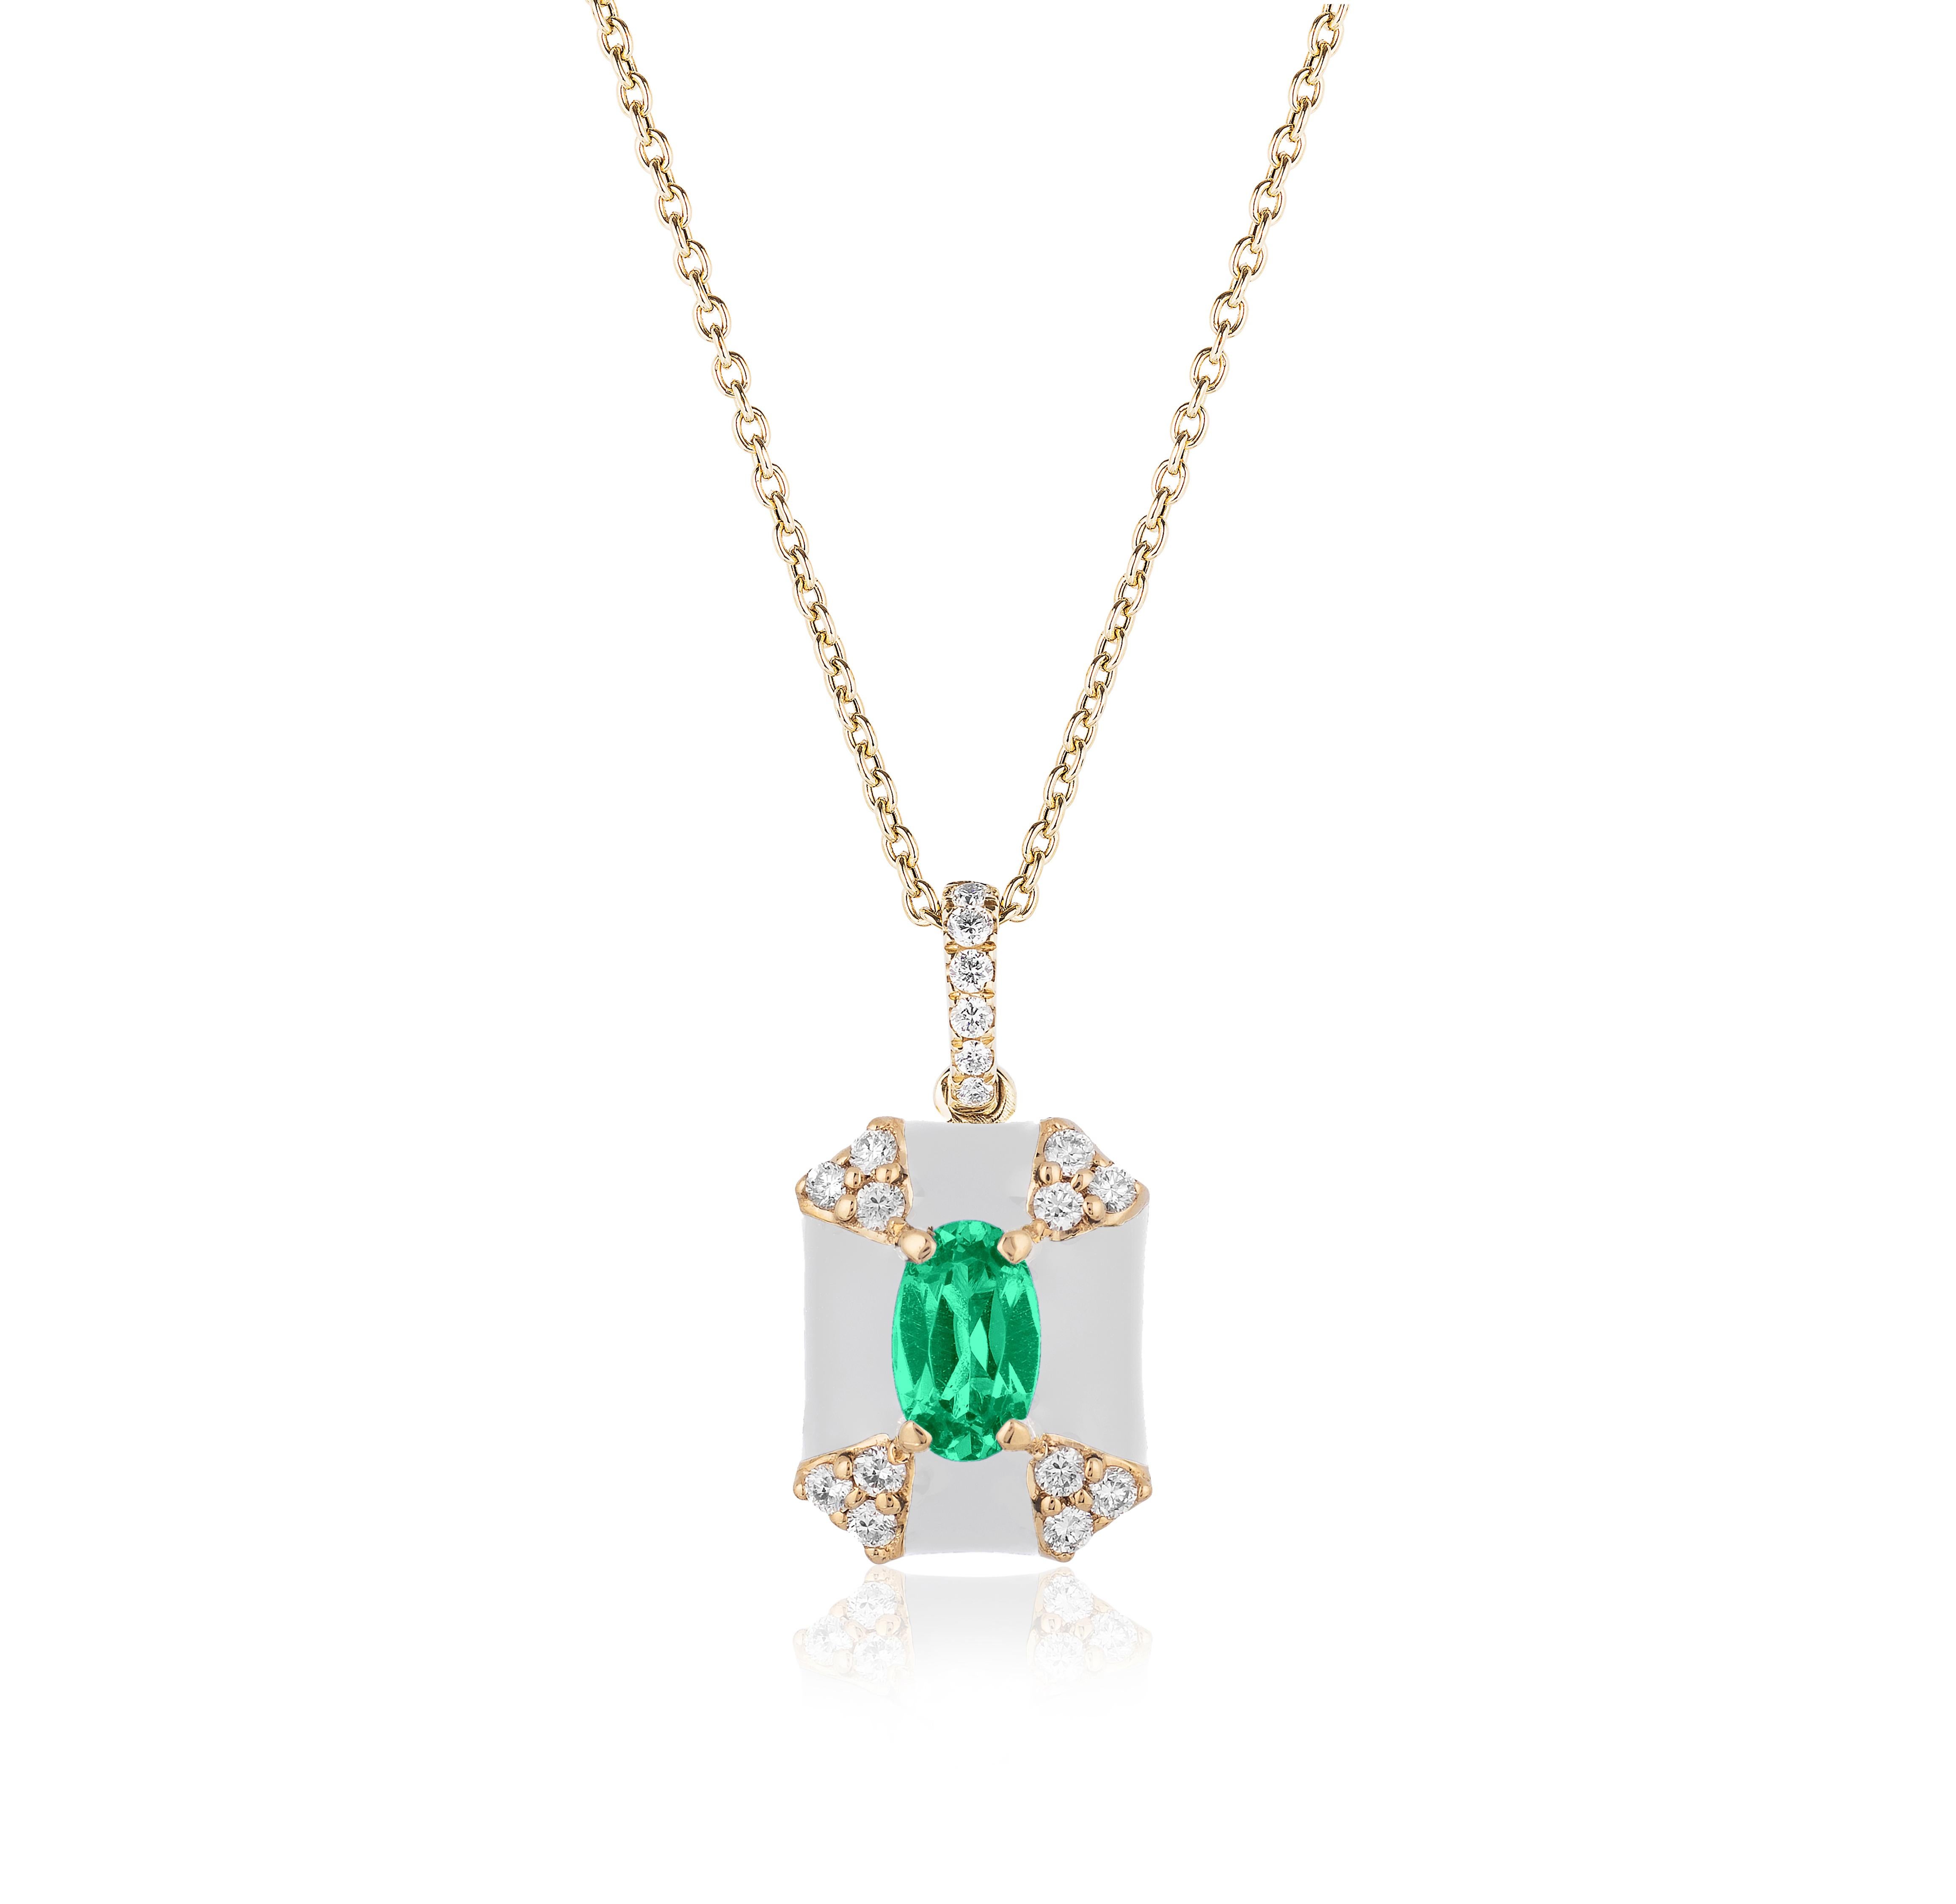 Octagon White Enamel Pendant with Emerald and Diamonds in 18K Yellow Gold. From ‘Queen’ Collection
Stone Size: 5 x 3 mm
Gemstone Approx Wt: Emerald- 0.21 Carats 
Diamonds: G-H / VS, Approx. Wt: 0.09 Carats 